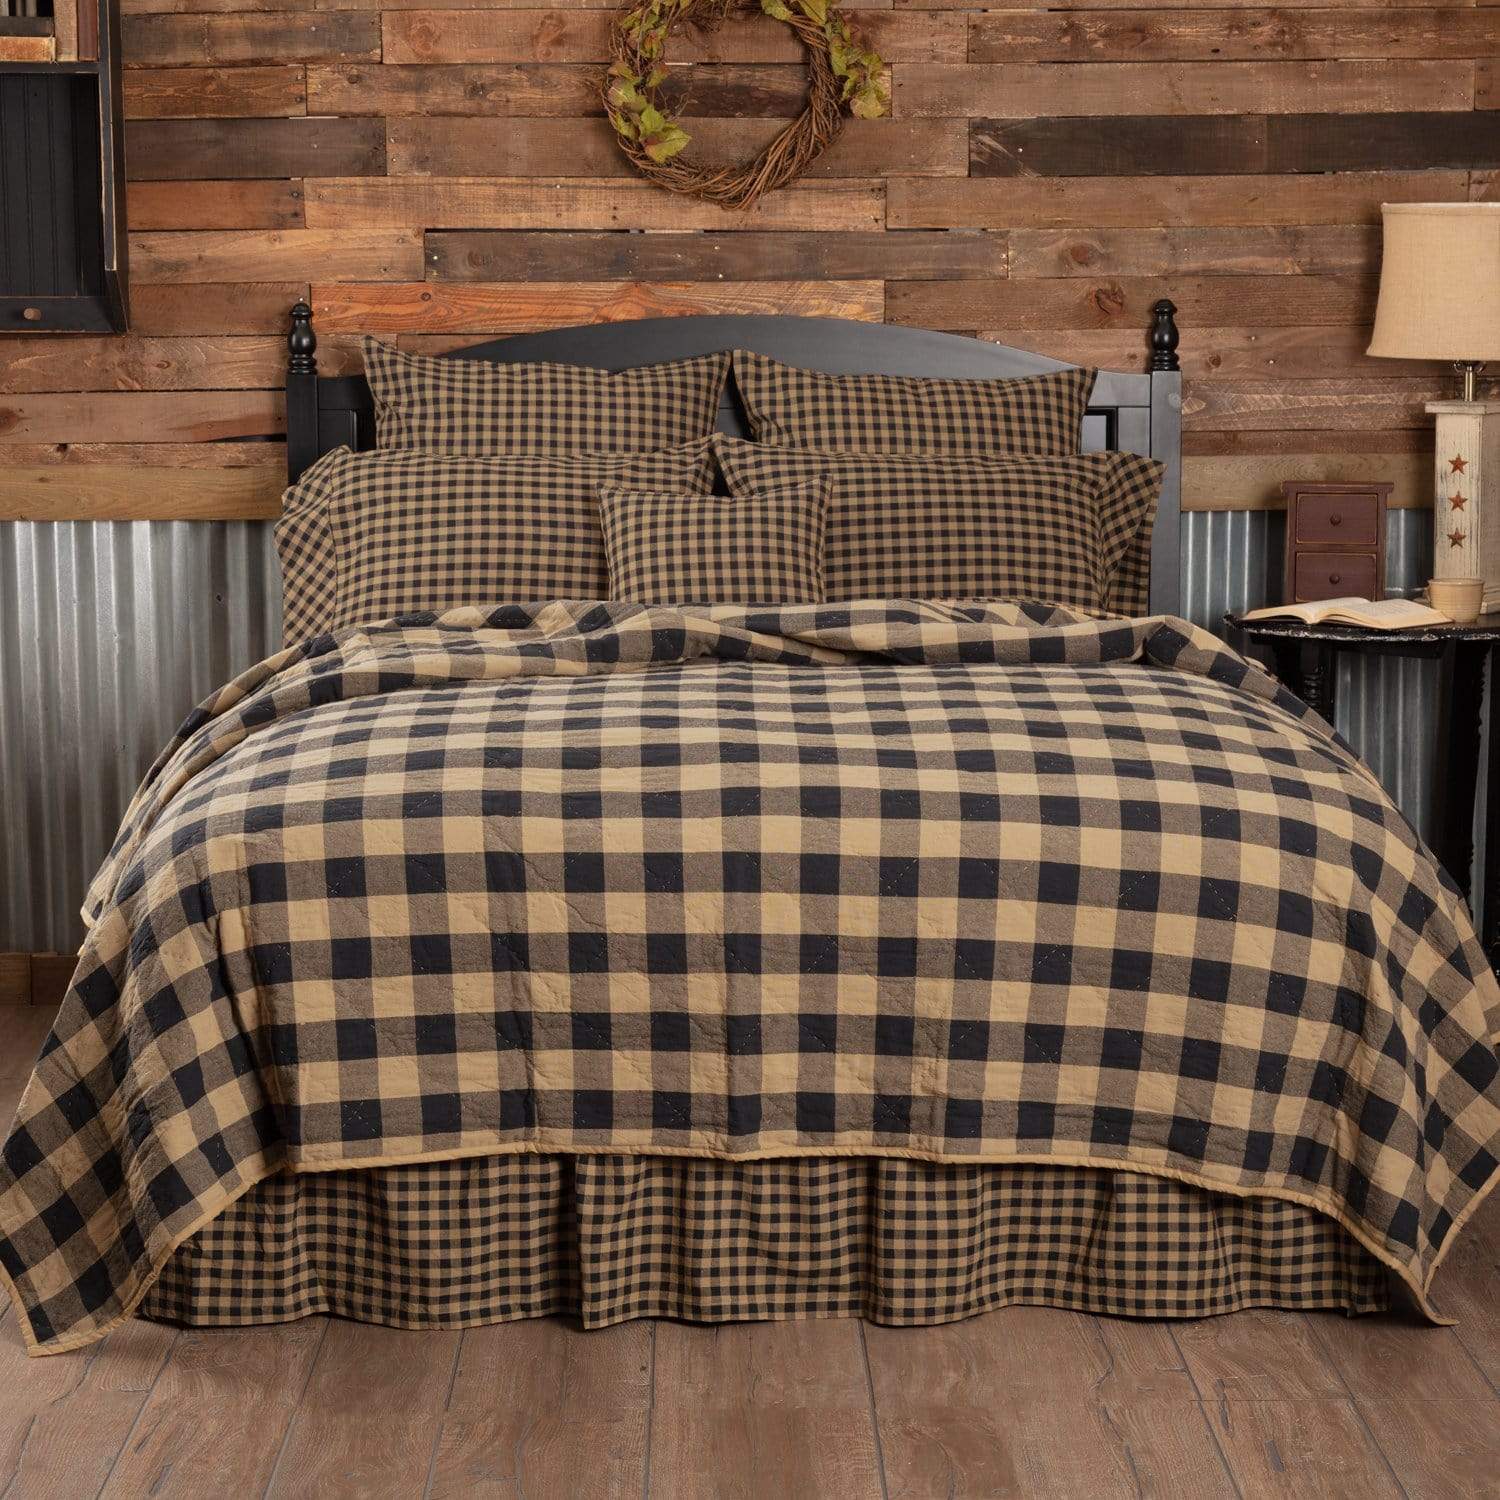 Black Check Twin Quilt Coverlet 68wx86l The Village Country Store